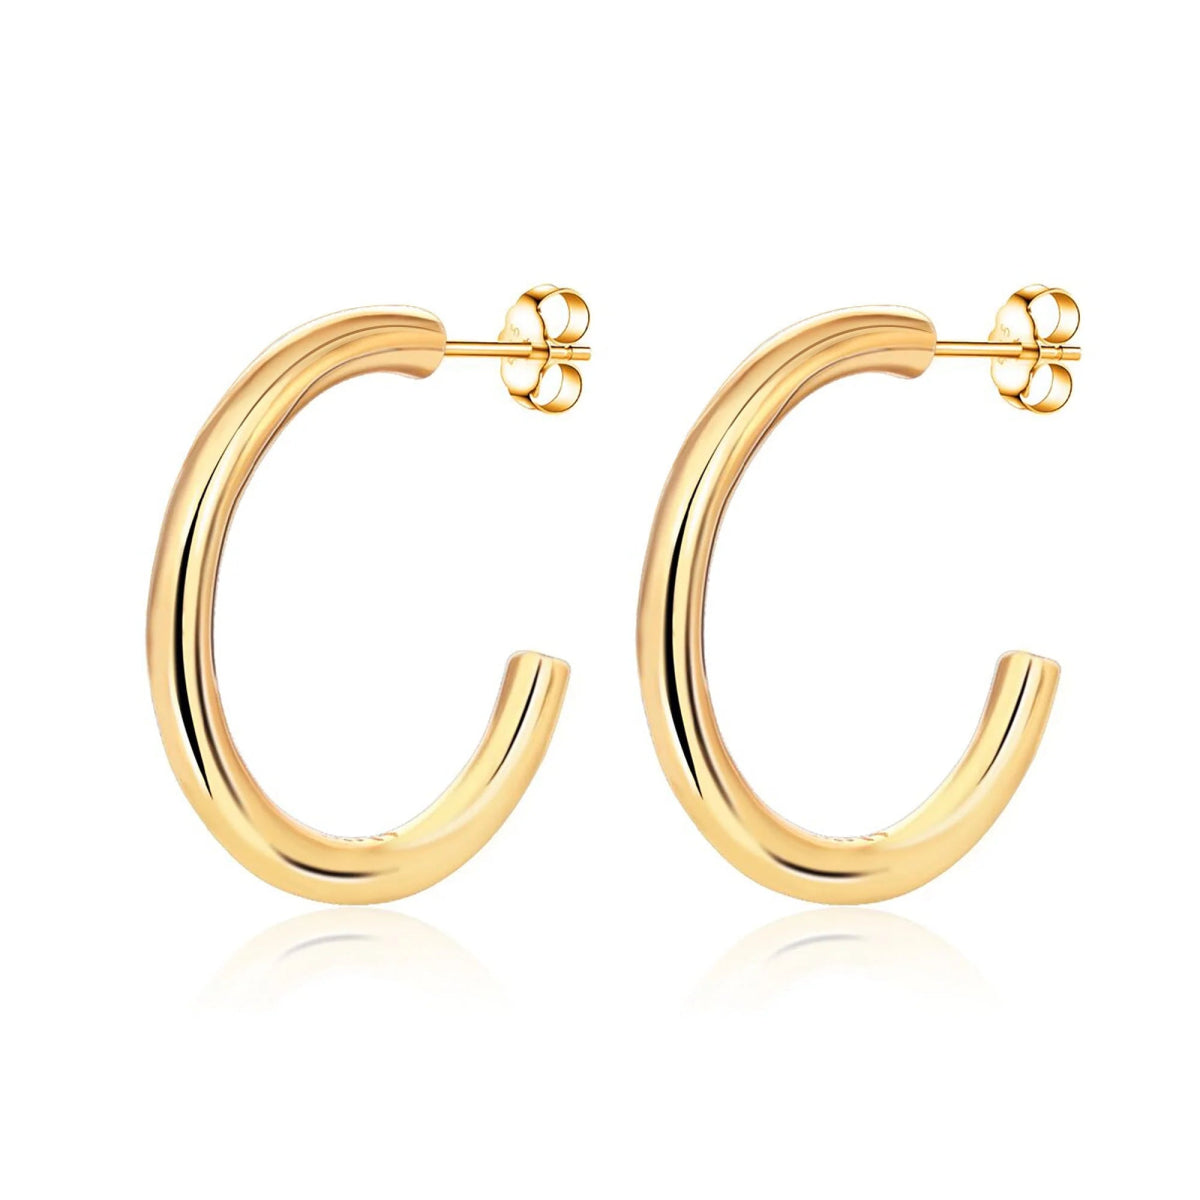 9ct Three Colour Gold Half Hoop Earrings - 16mm - G4975 | F.Hinds Jewellers